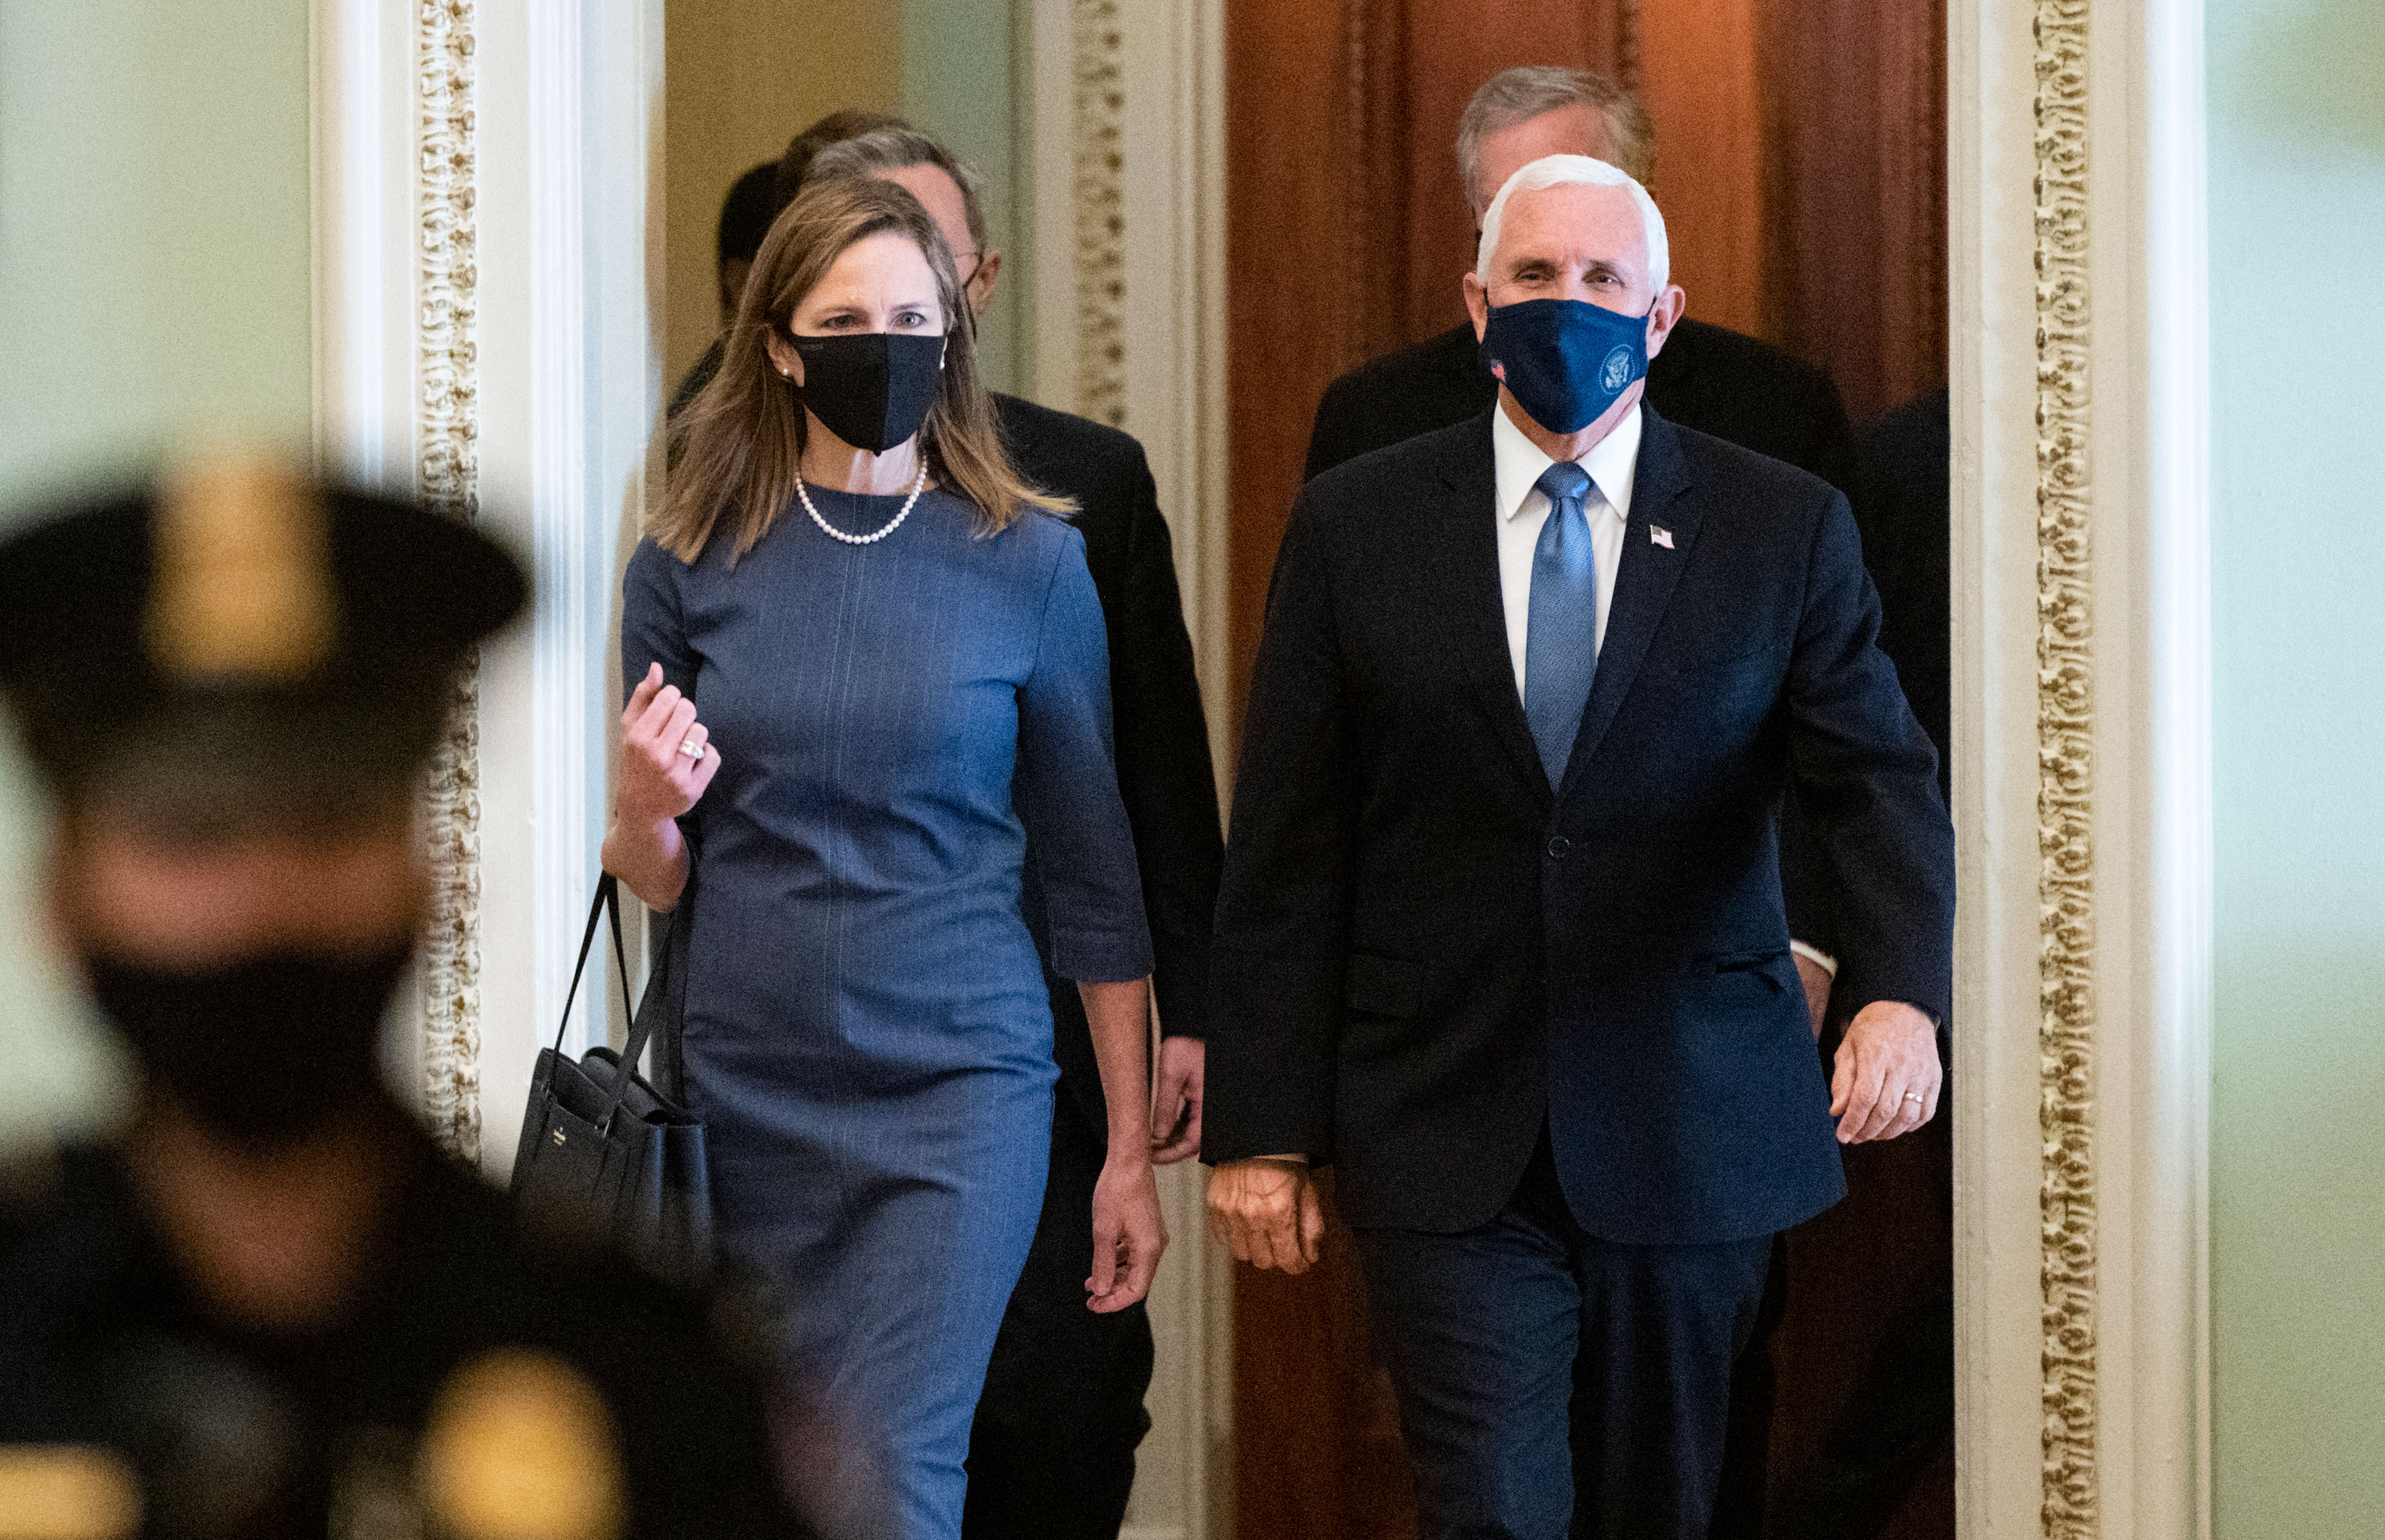 Supreme Court nominee Amy Coney Barrett, left, and Vice President Mike Pence walk through the Capitol on September 29.